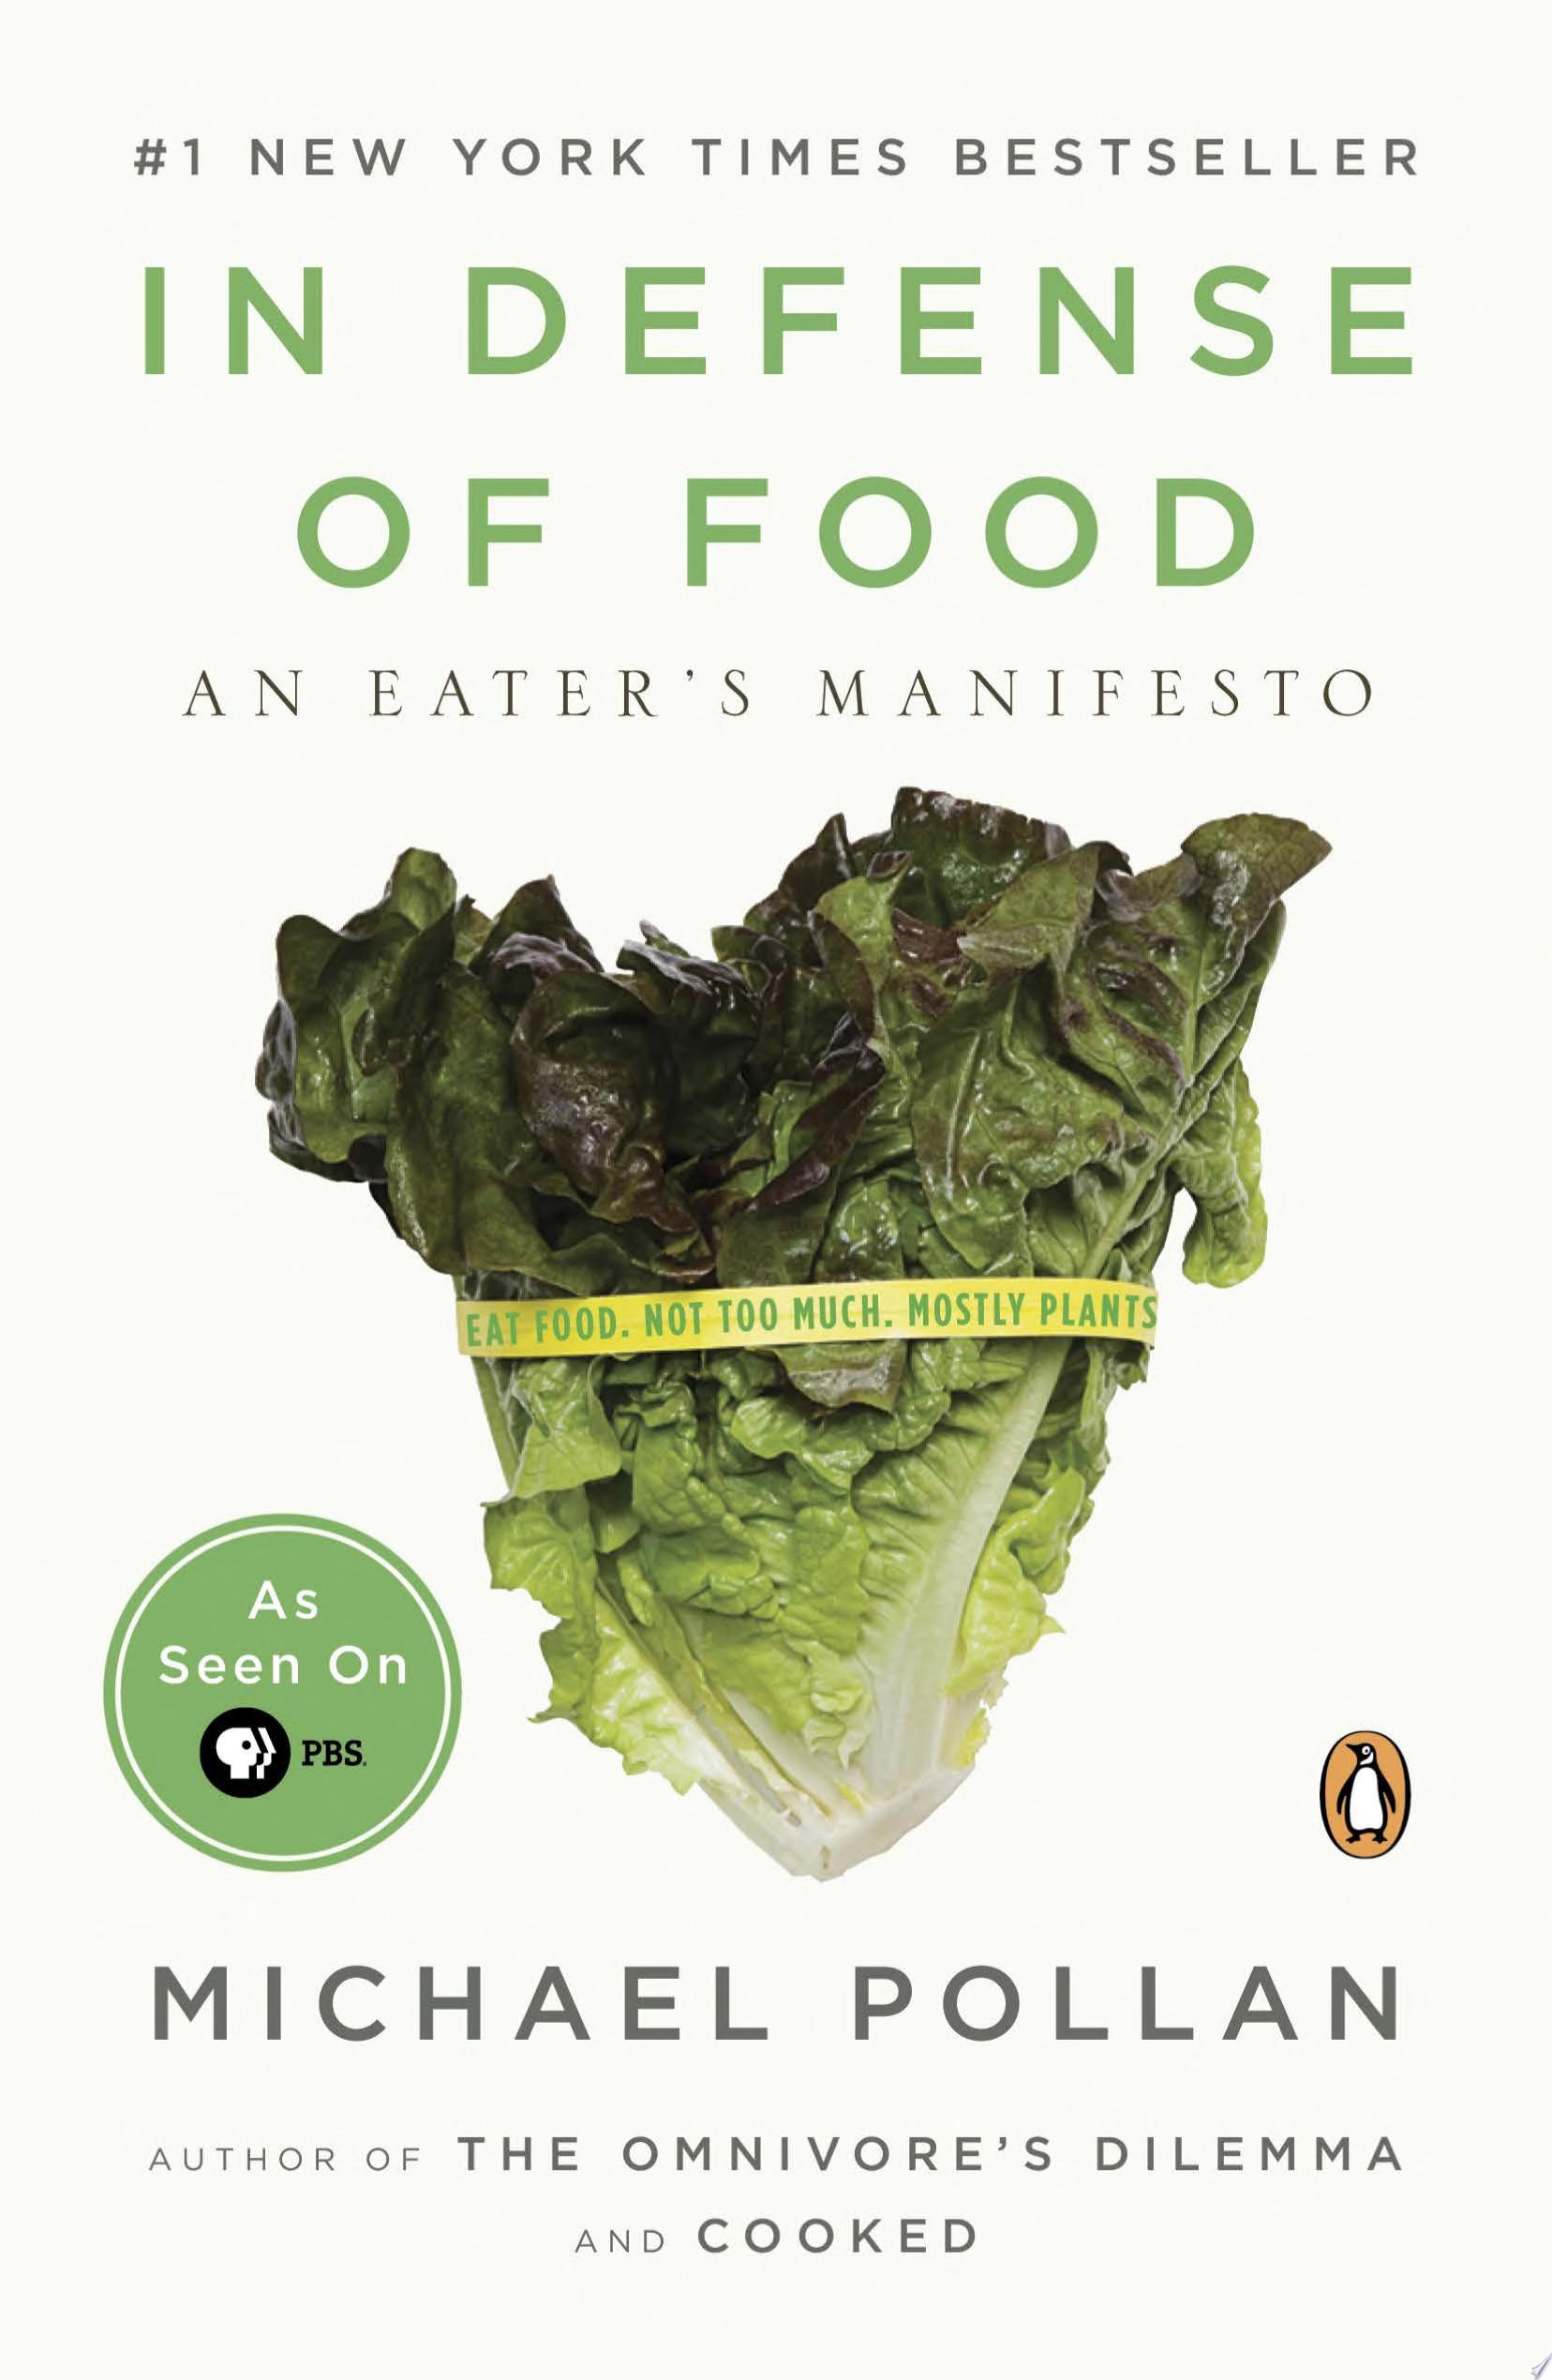 Image for "In Defense of Food"